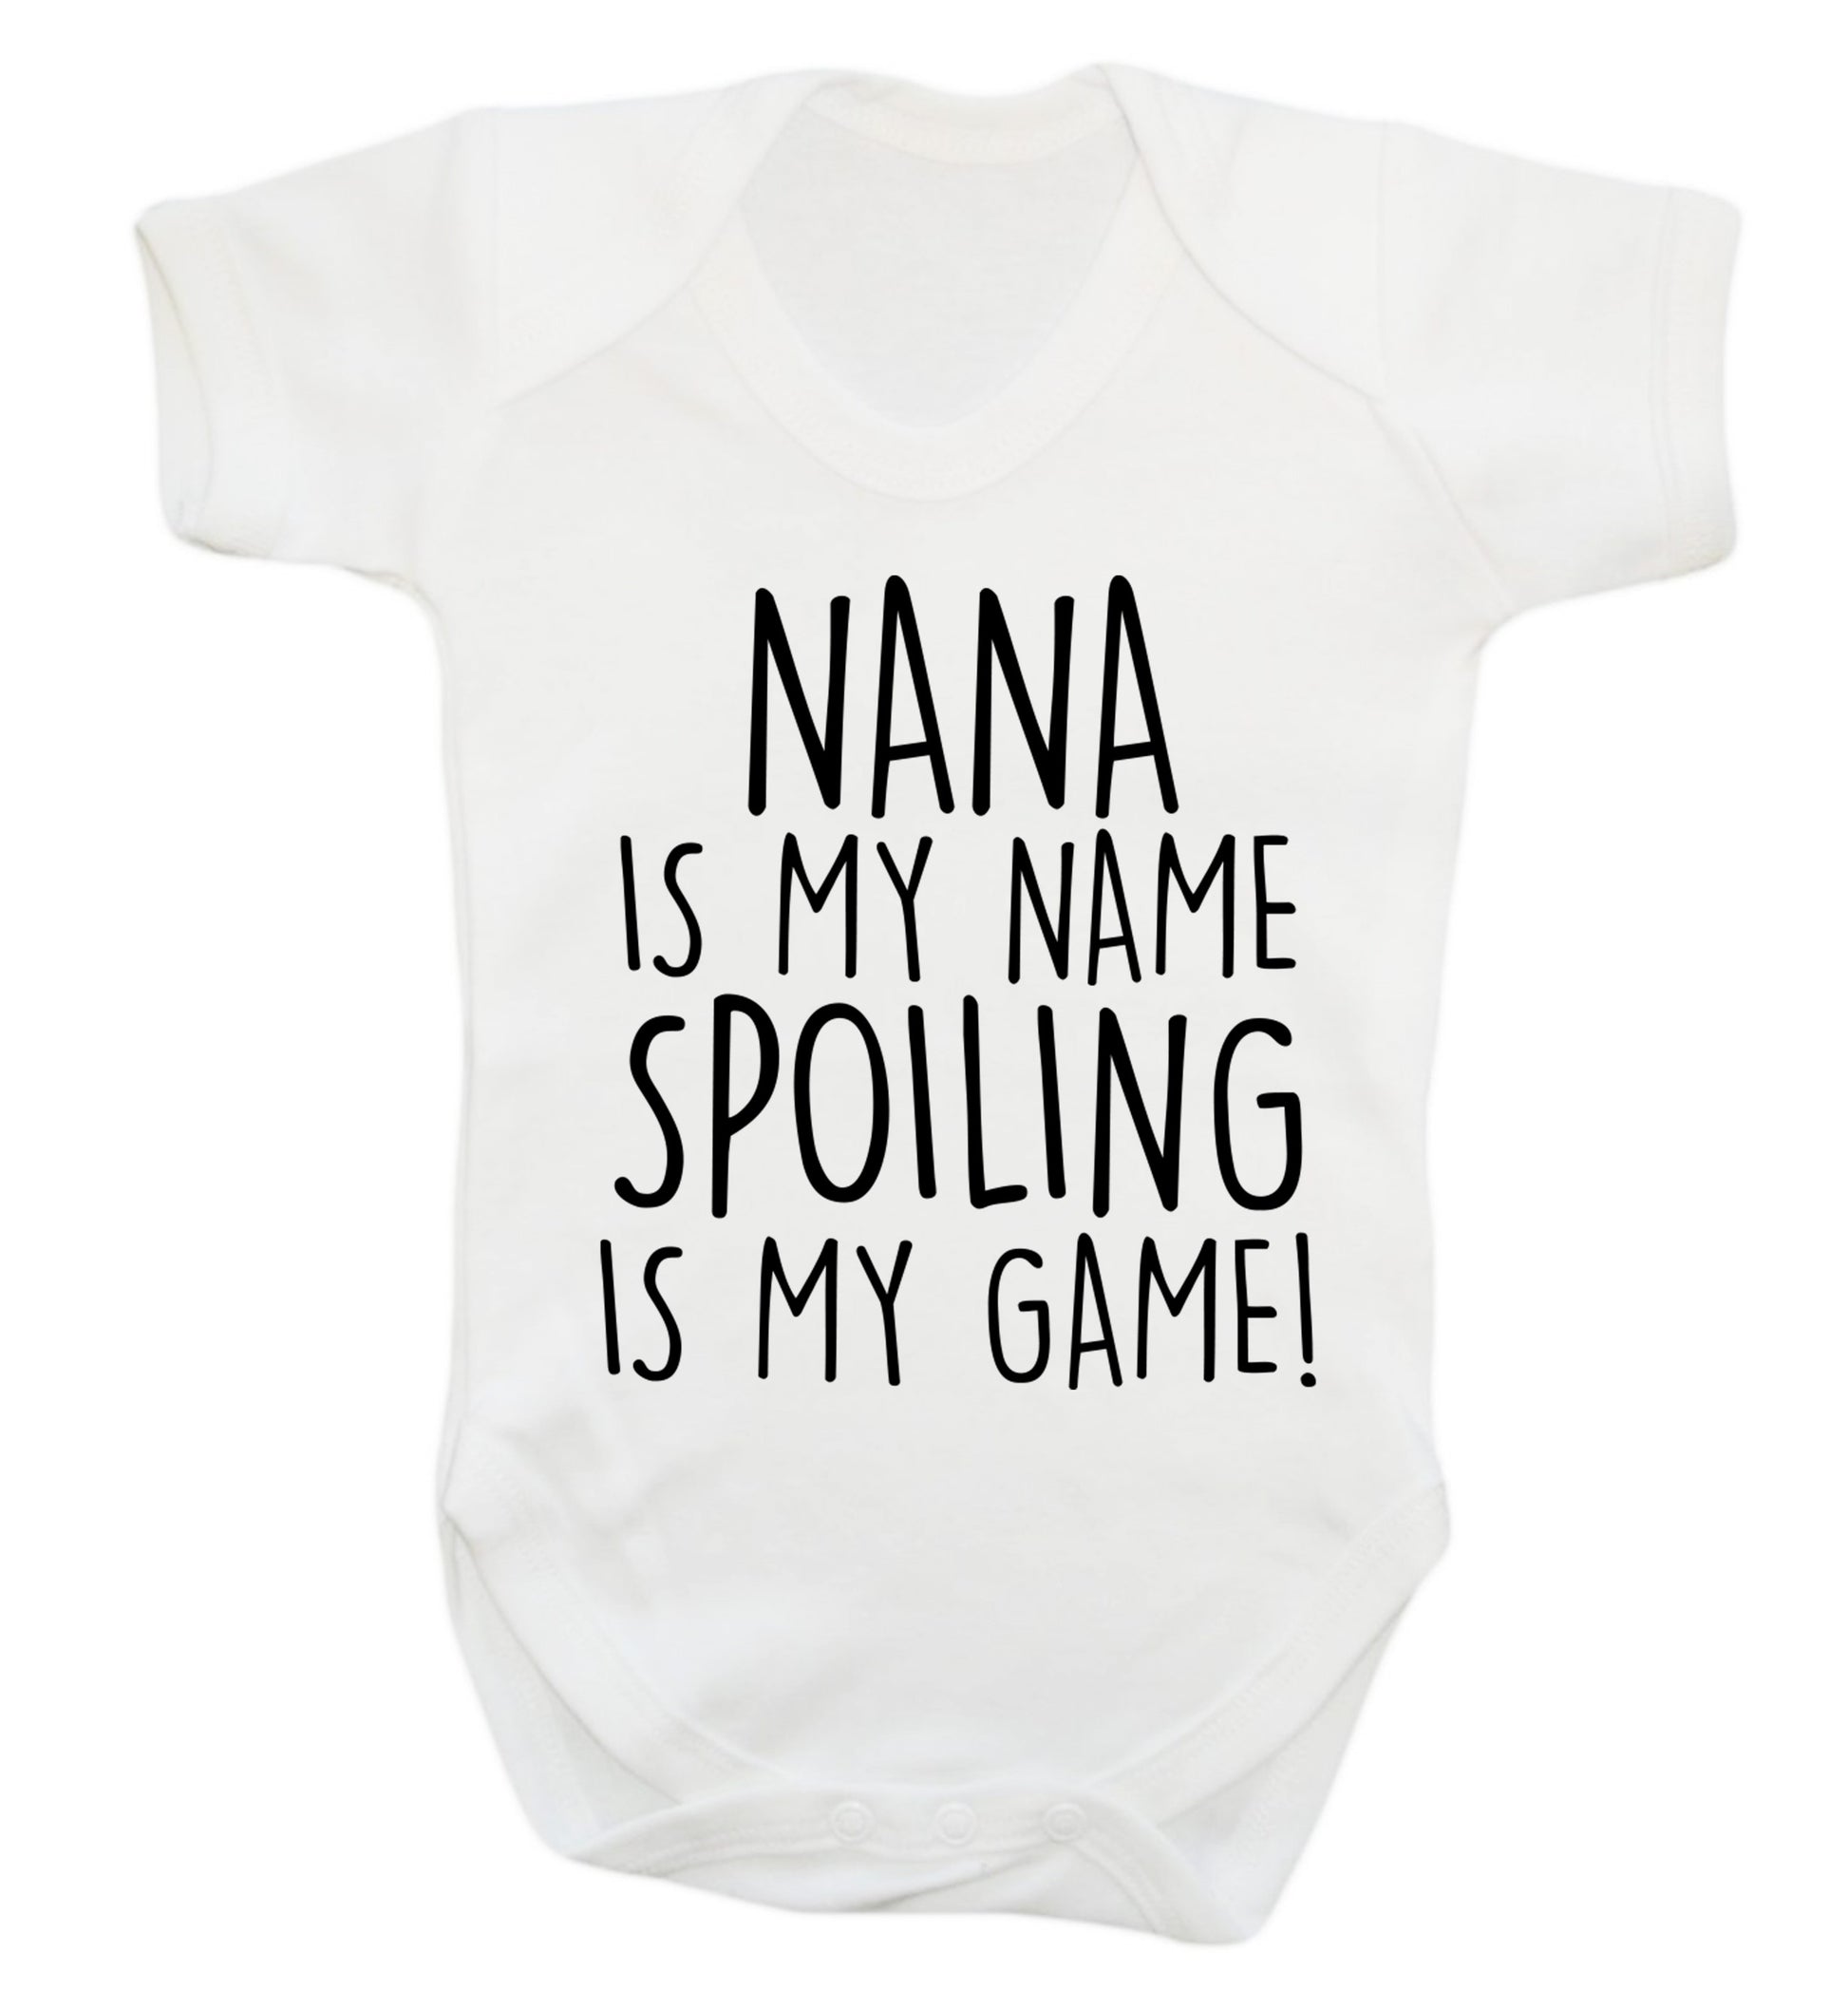 Nana is my name, spoiling is my game Baby Vest white 18-24 months